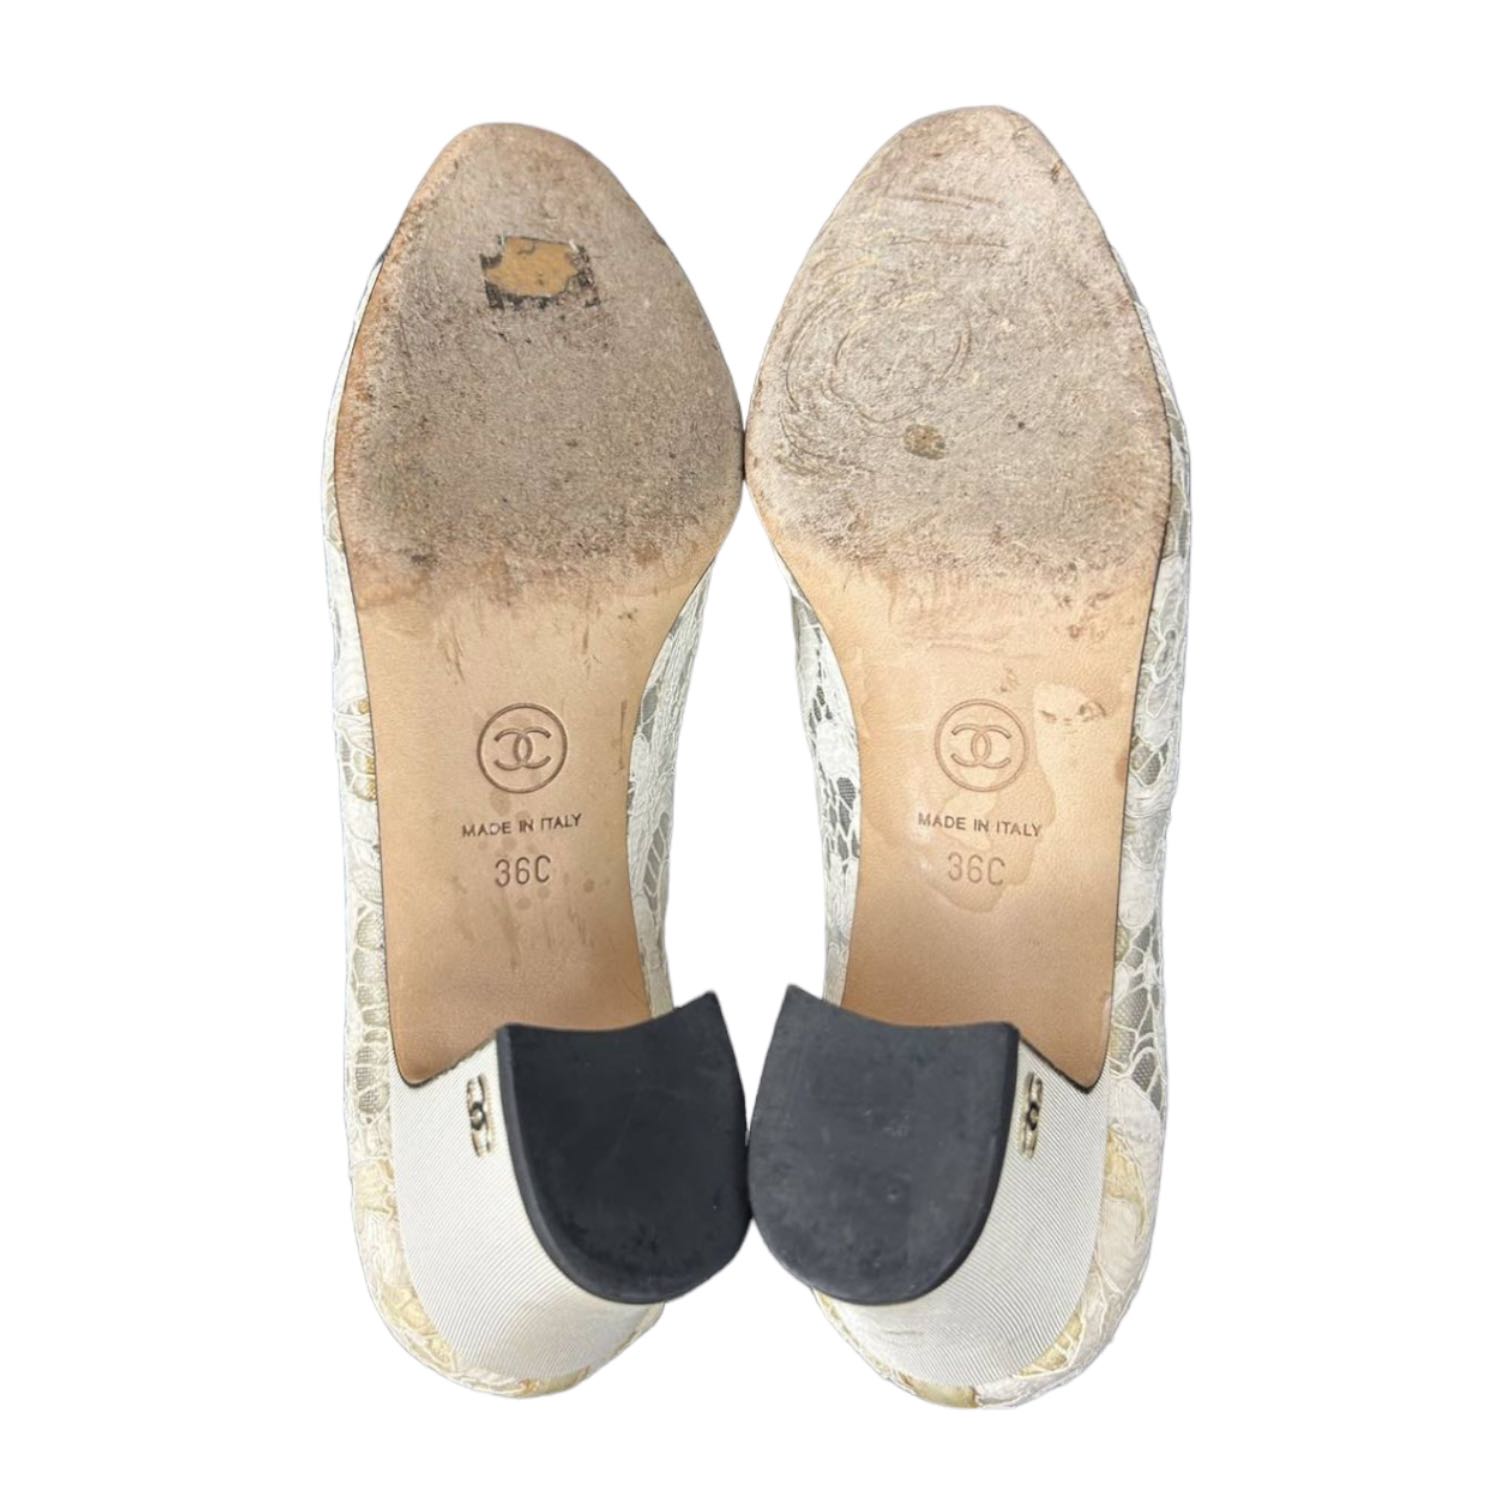 Chanel Sheer Lace with Contrast Toe Caps and Grosgrain Details Pumps - 6